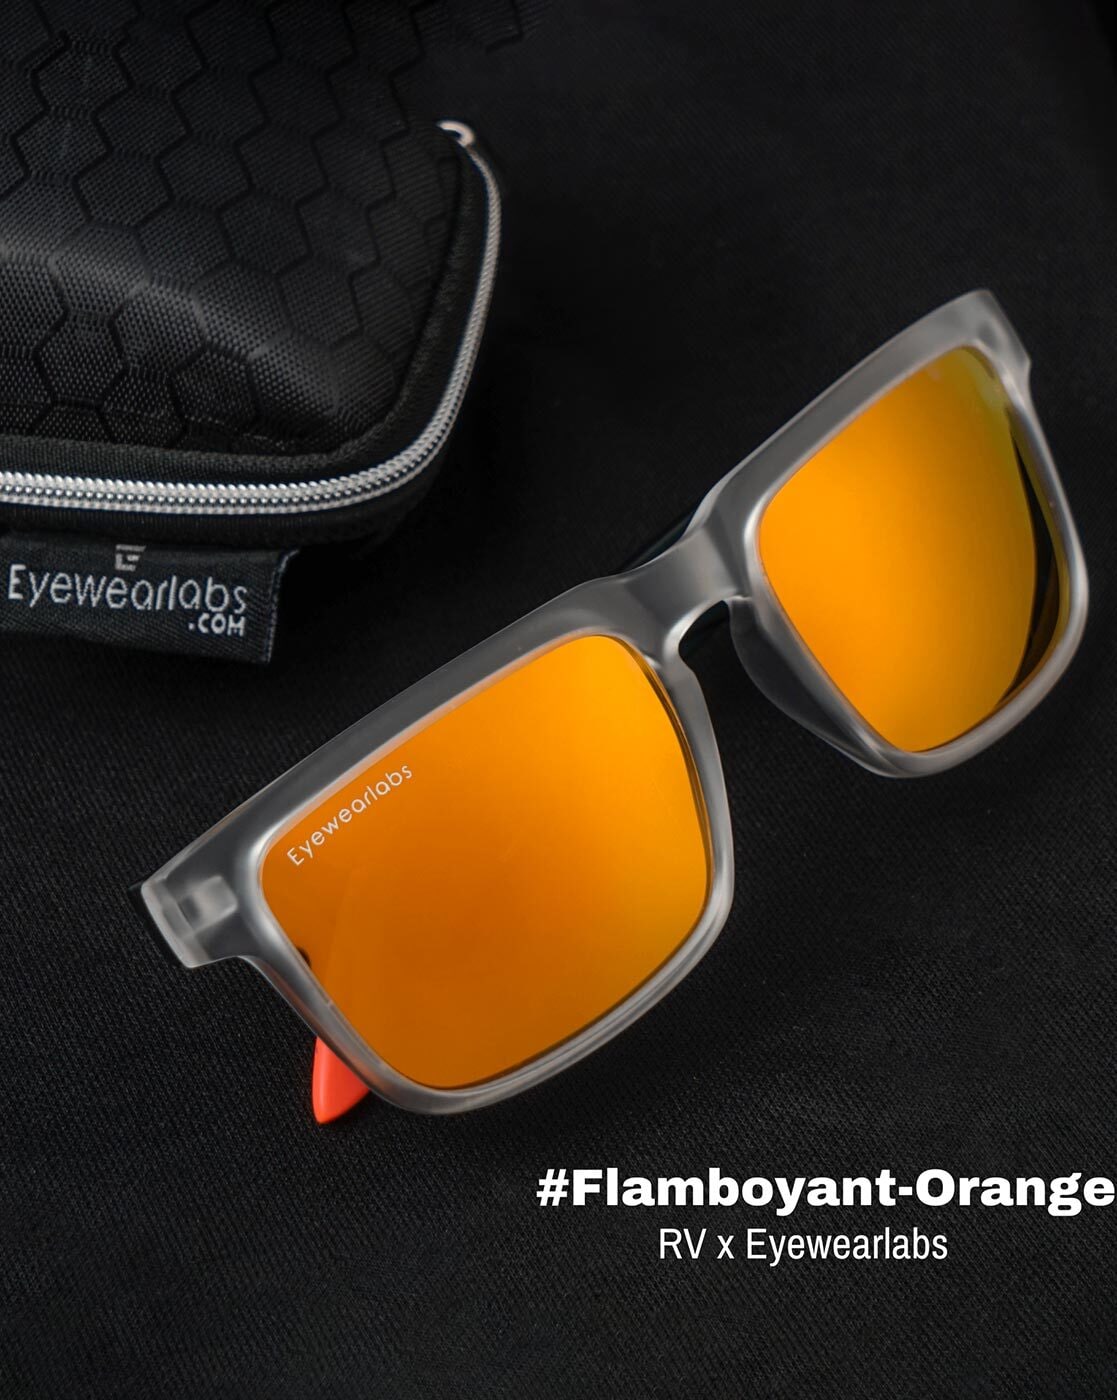 Discover more than 175 eyewearlabs sunglasses orange best